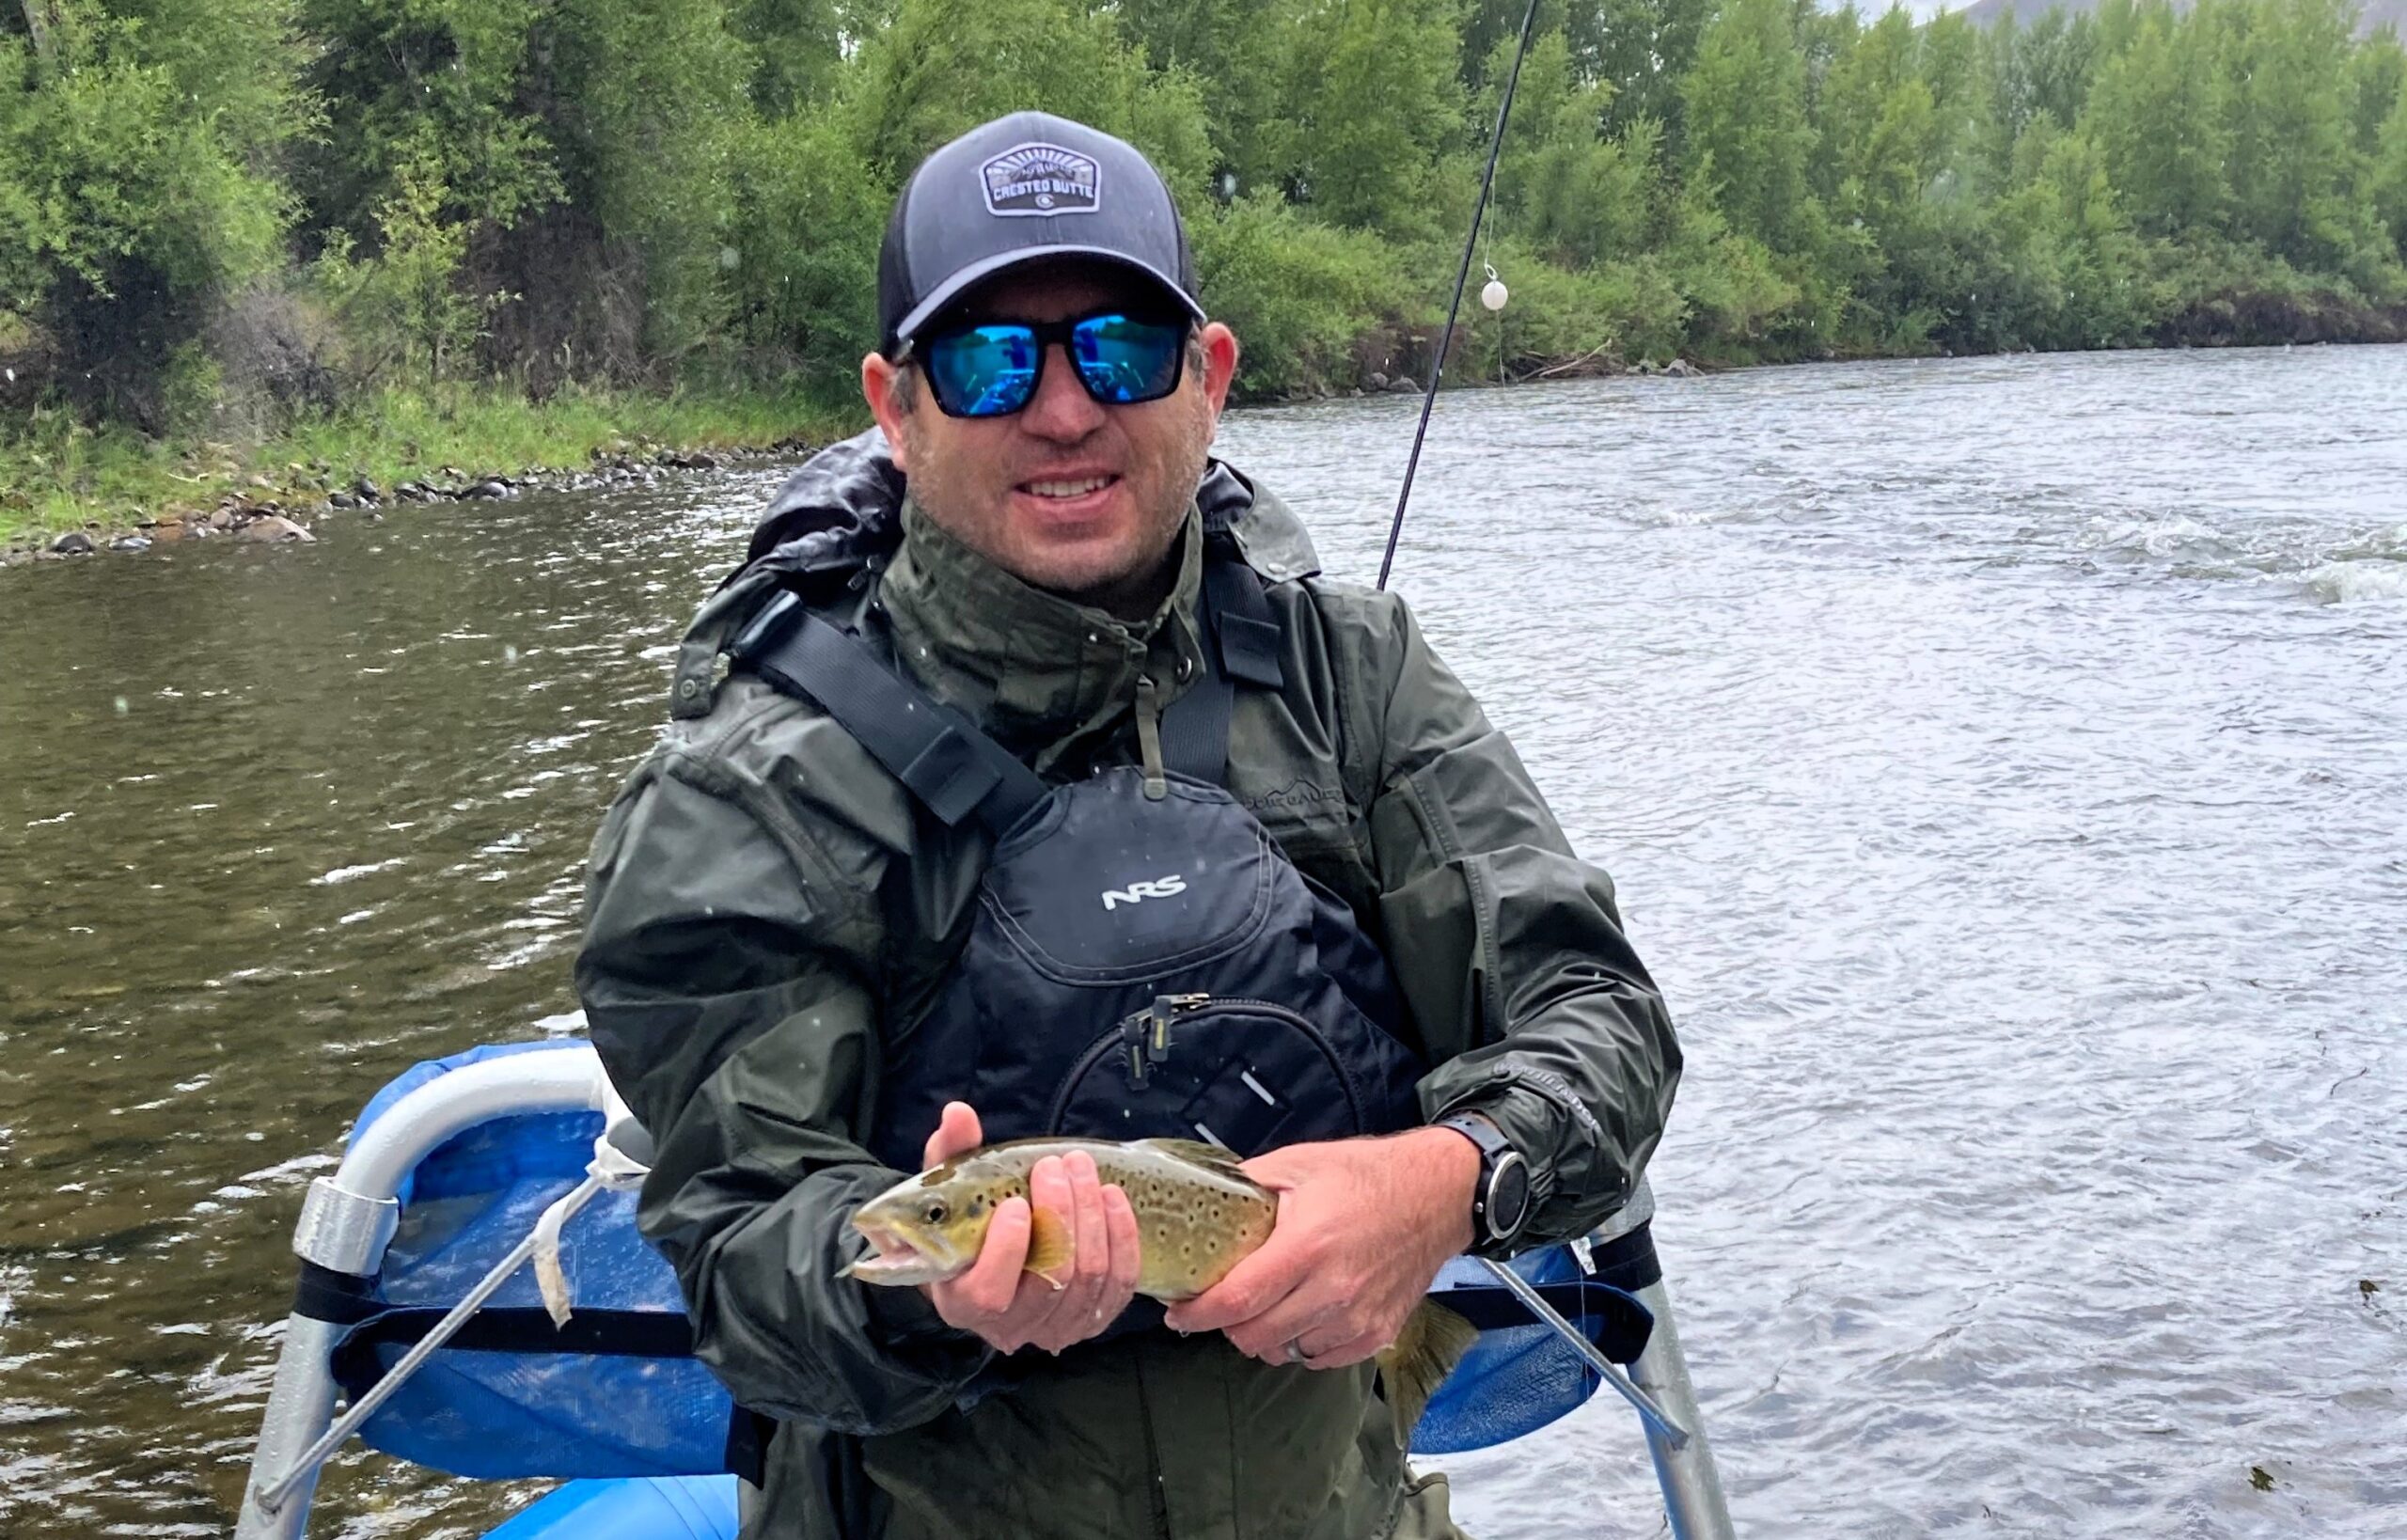 John Cessar, PE Airport Development Senior Project Manager and Fly Fisherman